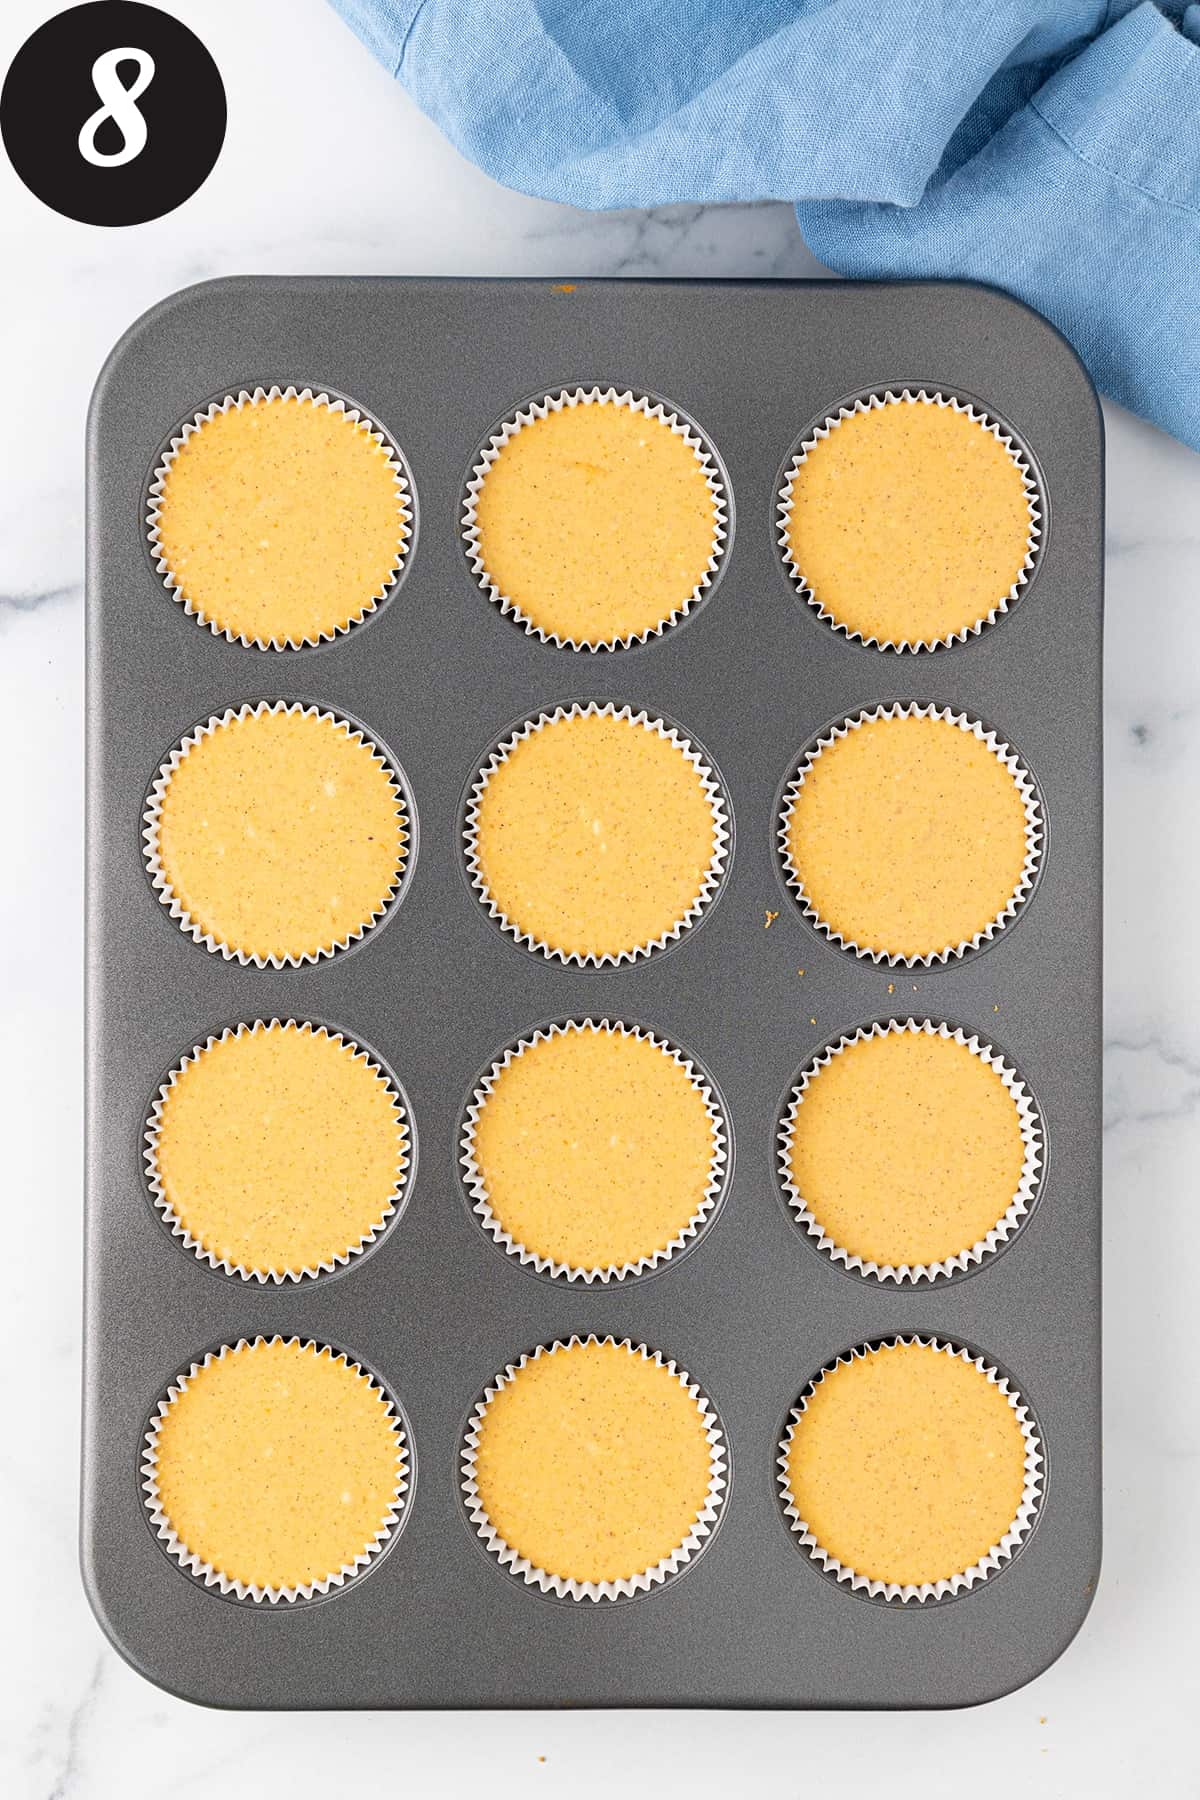 A twelve cup muffin pan lined with paper muffin liners filled with pumpkin cheesecake batter on a white counter top.